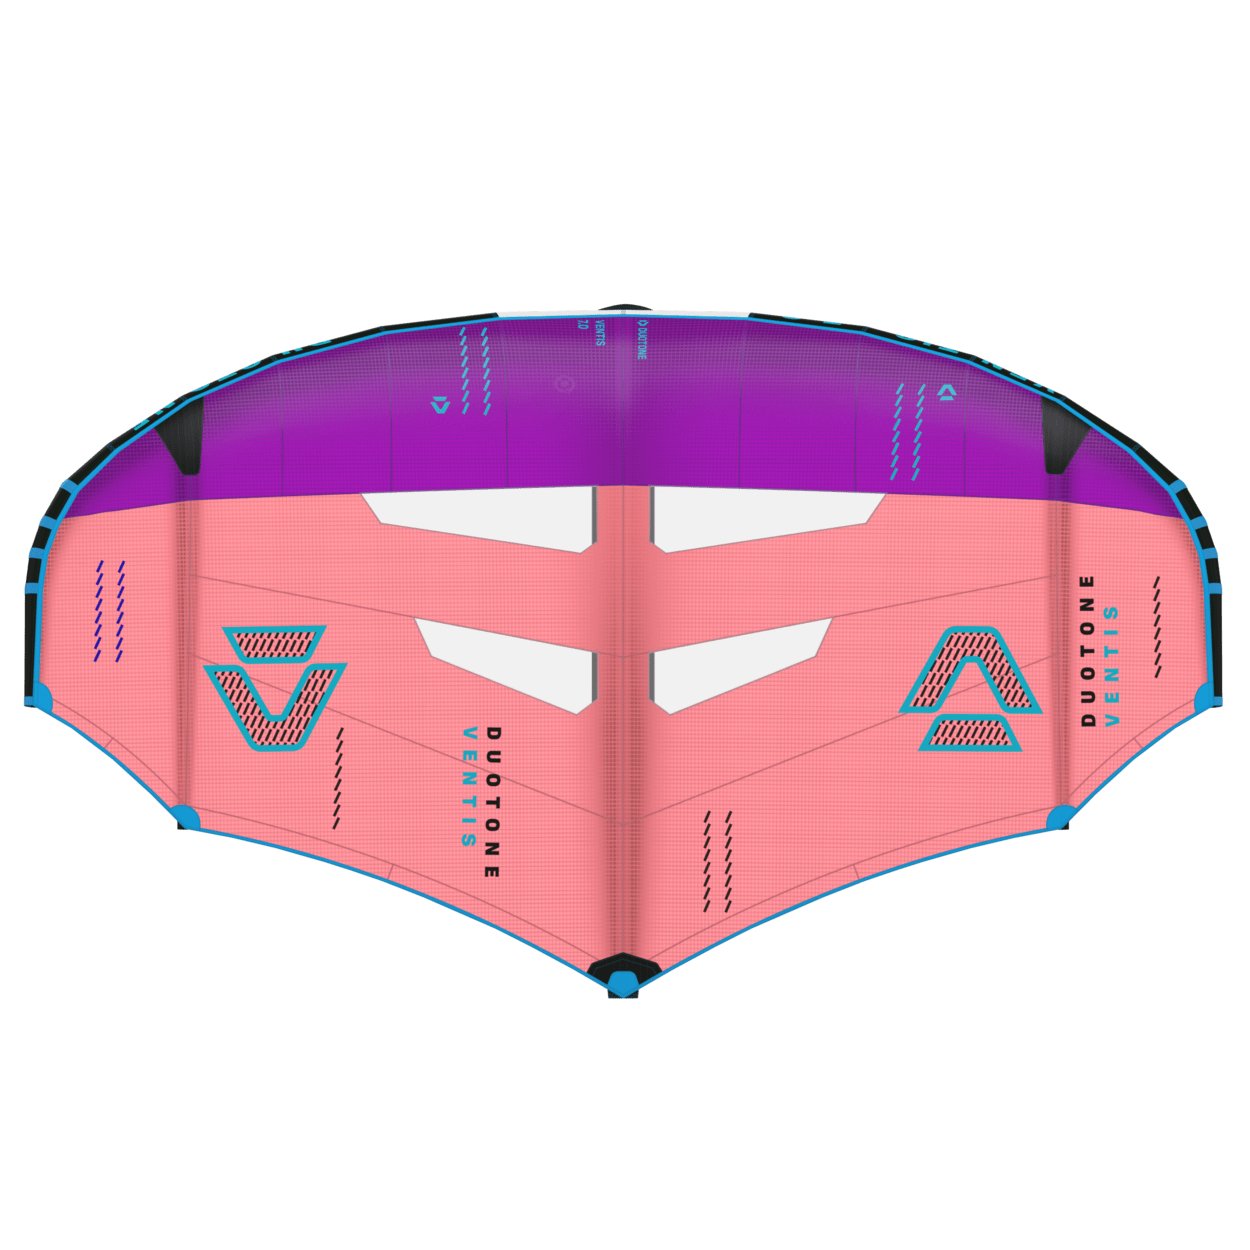 Duotone Foil Wing Ventis 2024 - Worthing Watersports - 9010583183244 - Foilwing - Duotone X